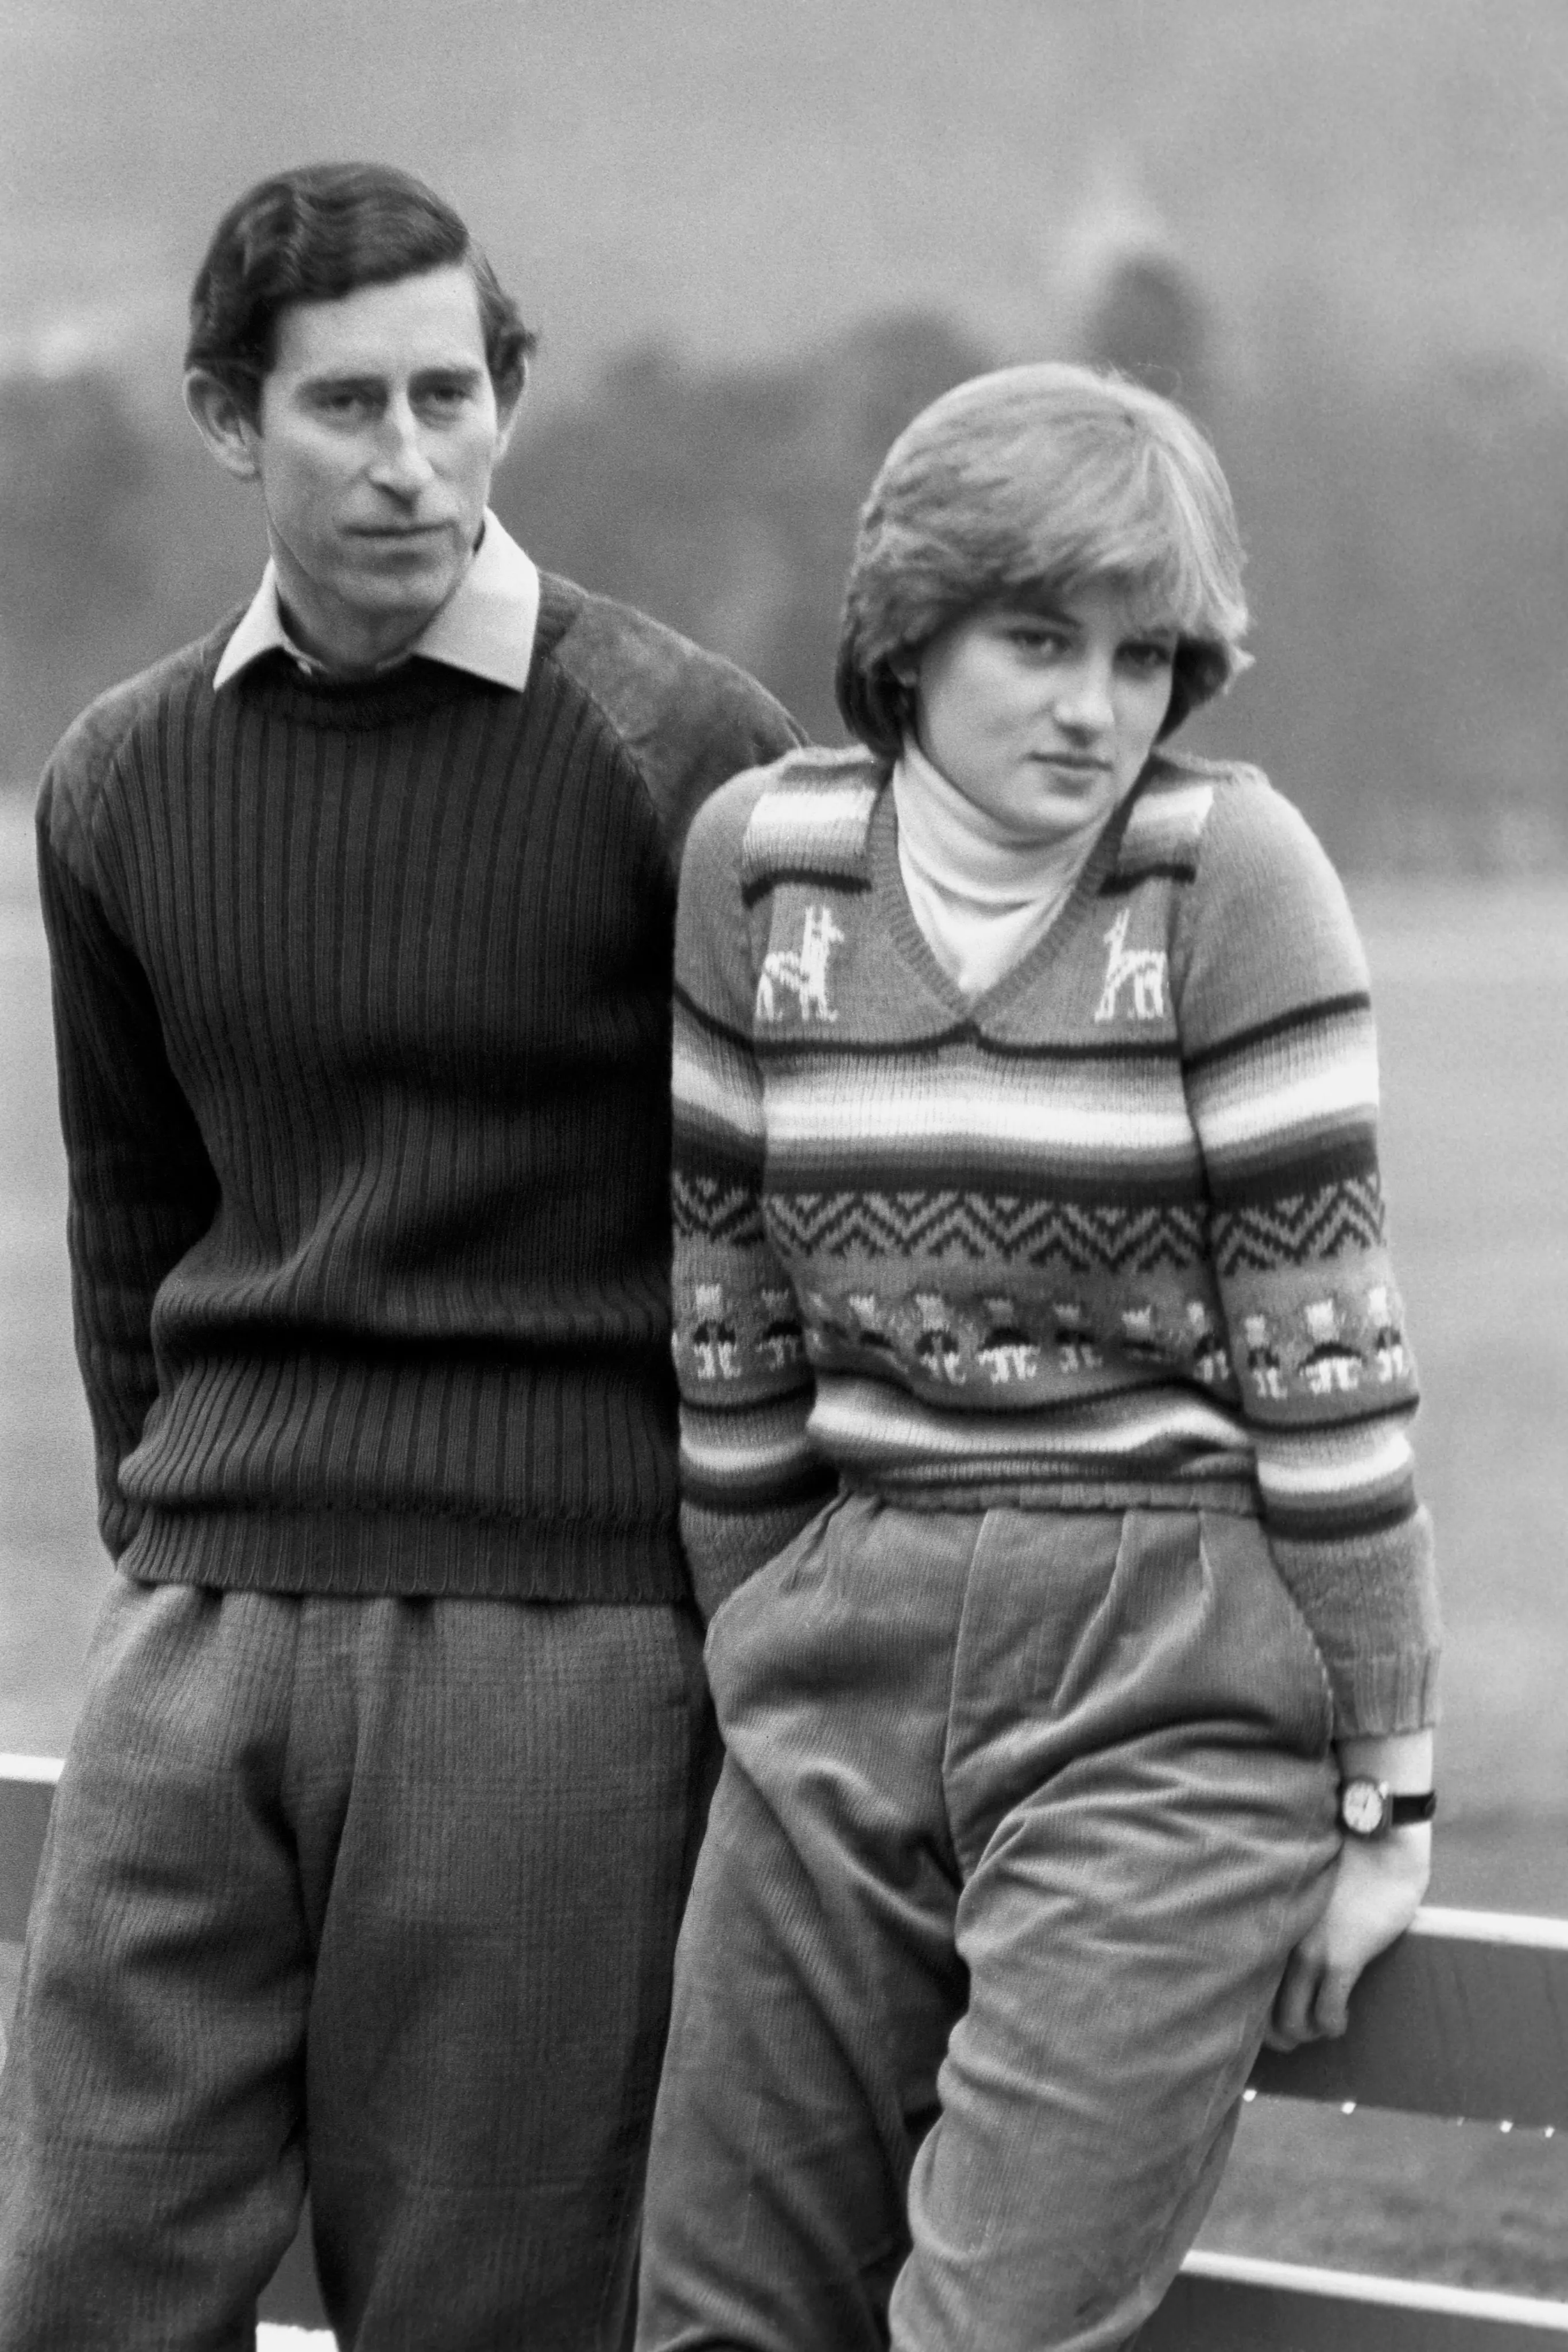 Season 5 will continue to focus on the relationship between Princess Diana and Charles (